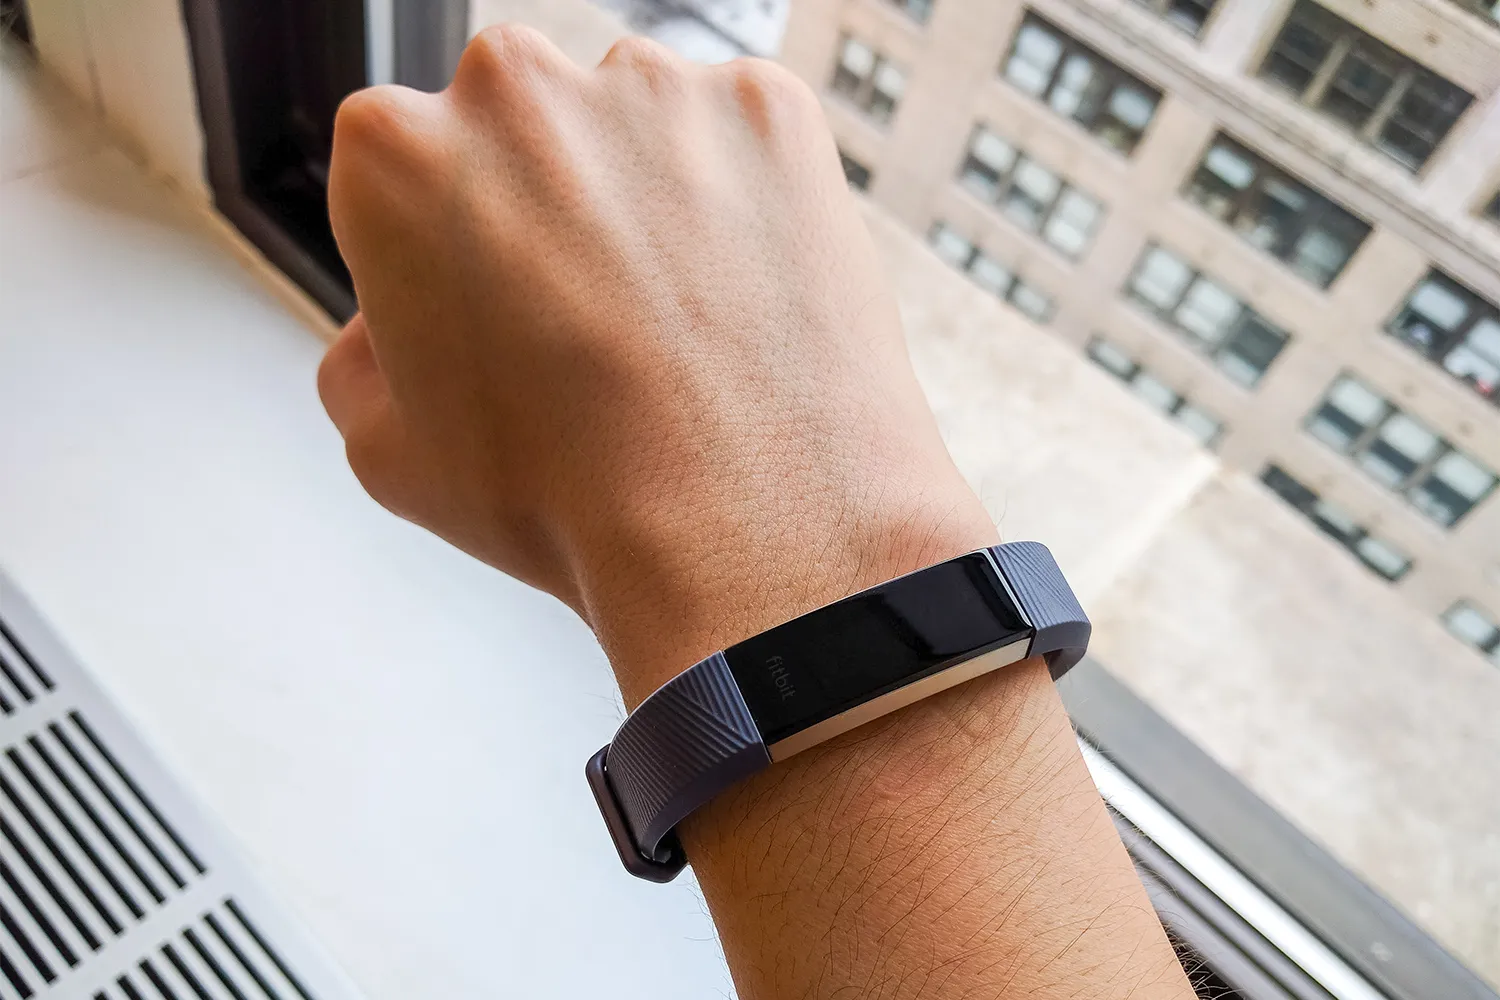 Release Date: Discovering When Fitbit Alta Hit The Market